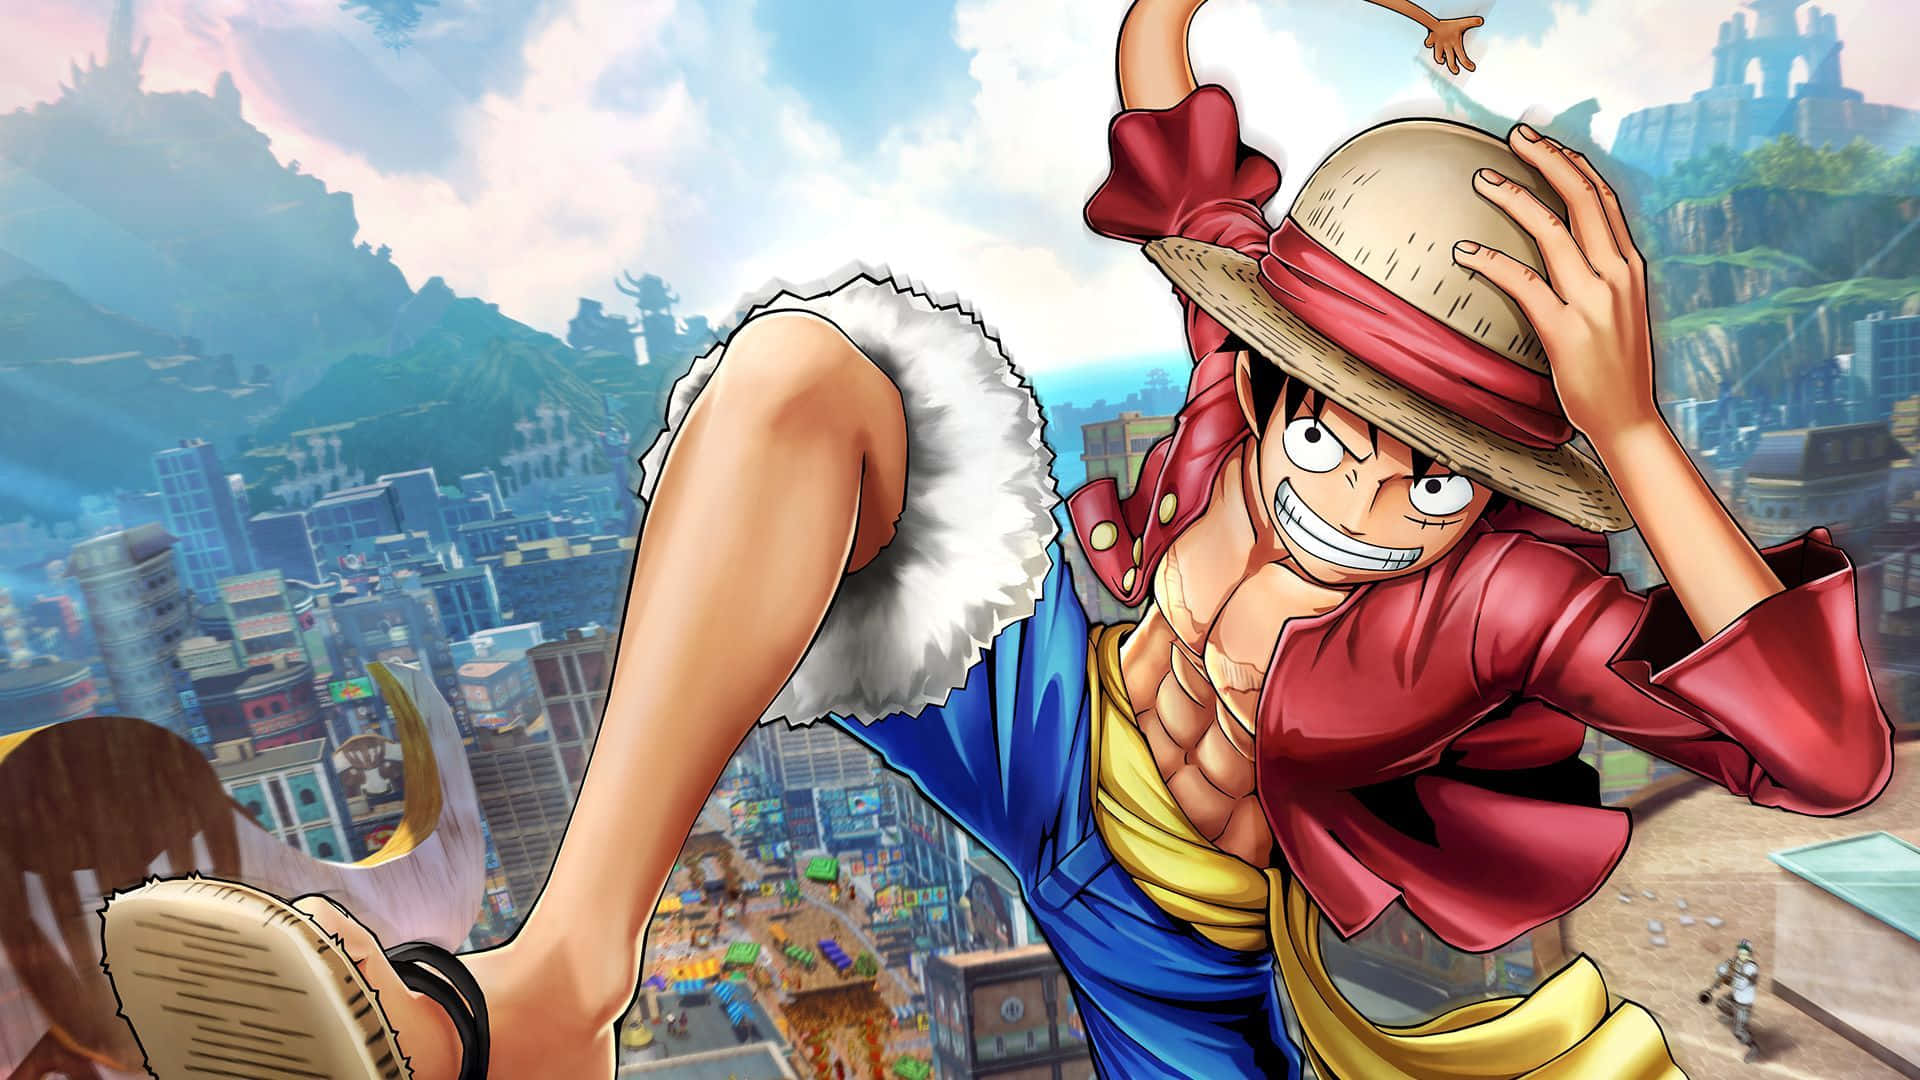 One Piece Anime Jumping From Building Wallpaper